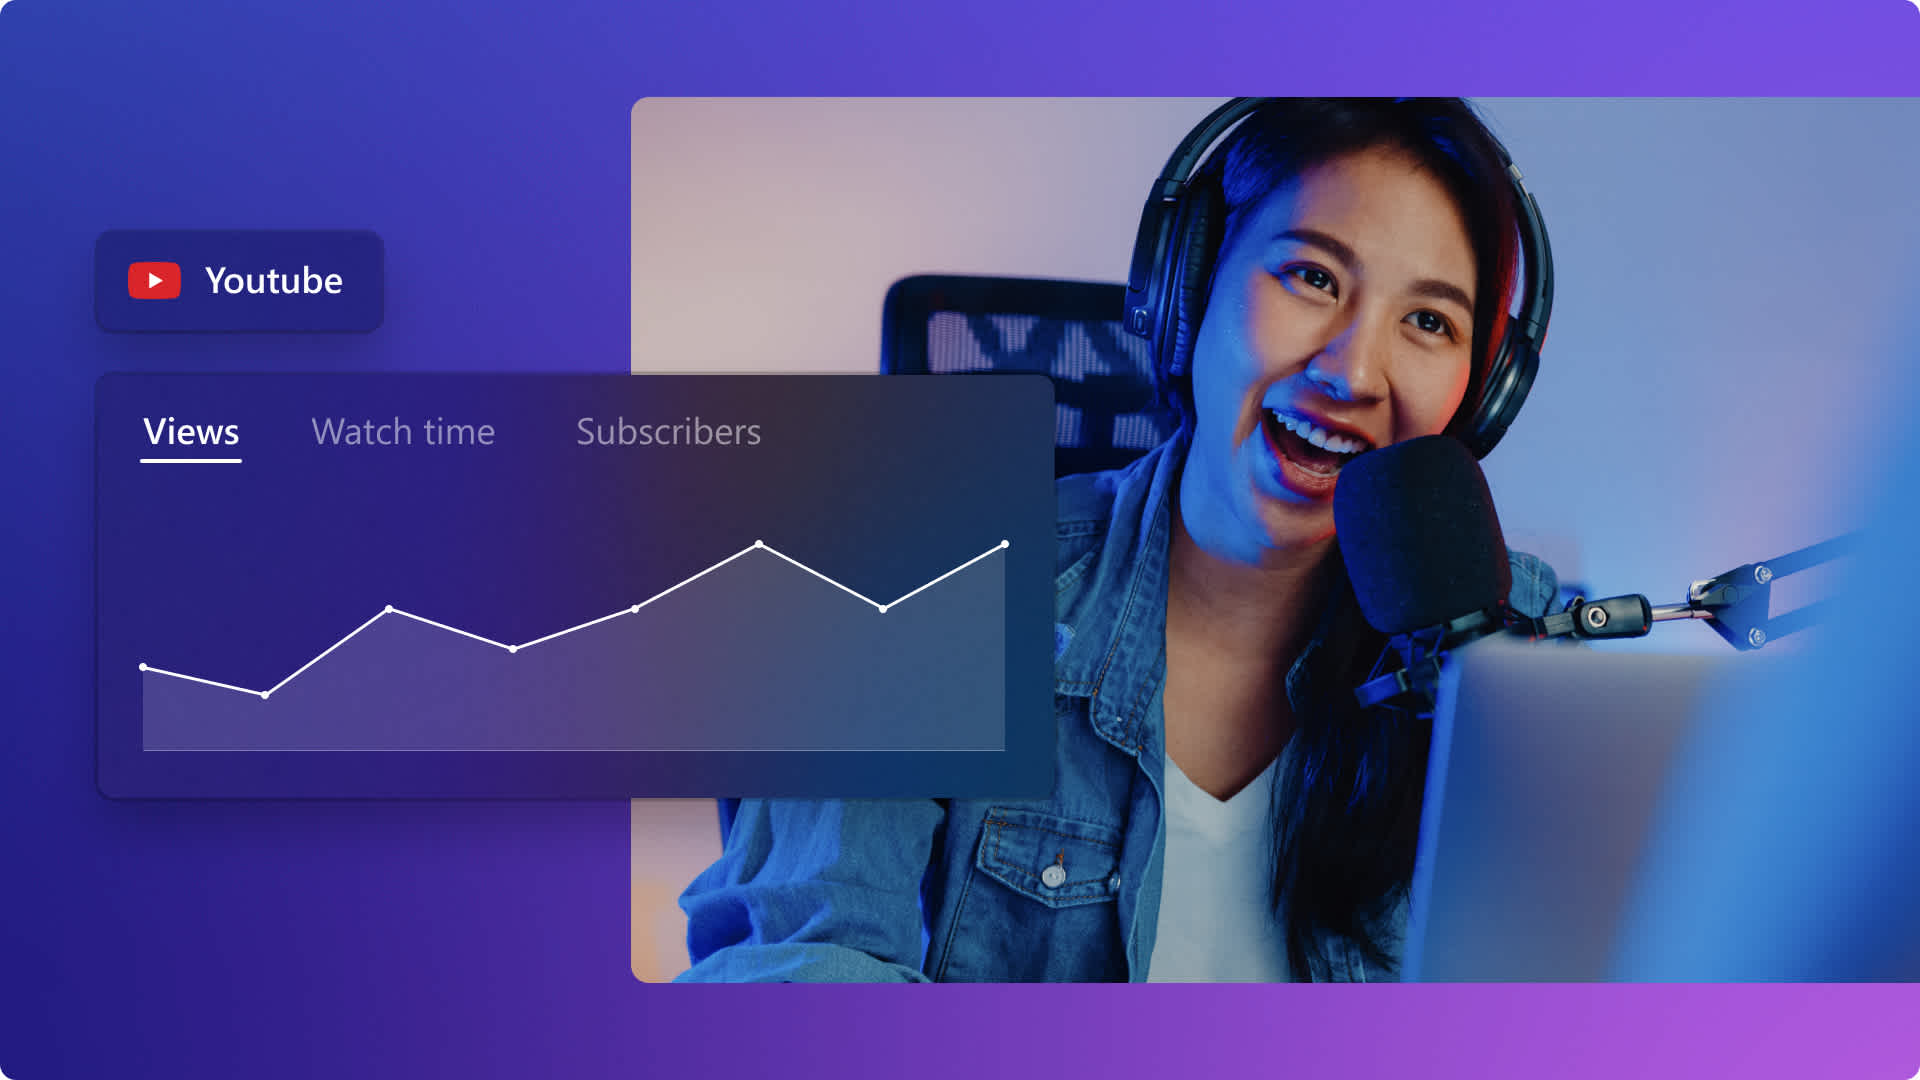 Studio: The Tools to Manage Your Channel Like a Pro